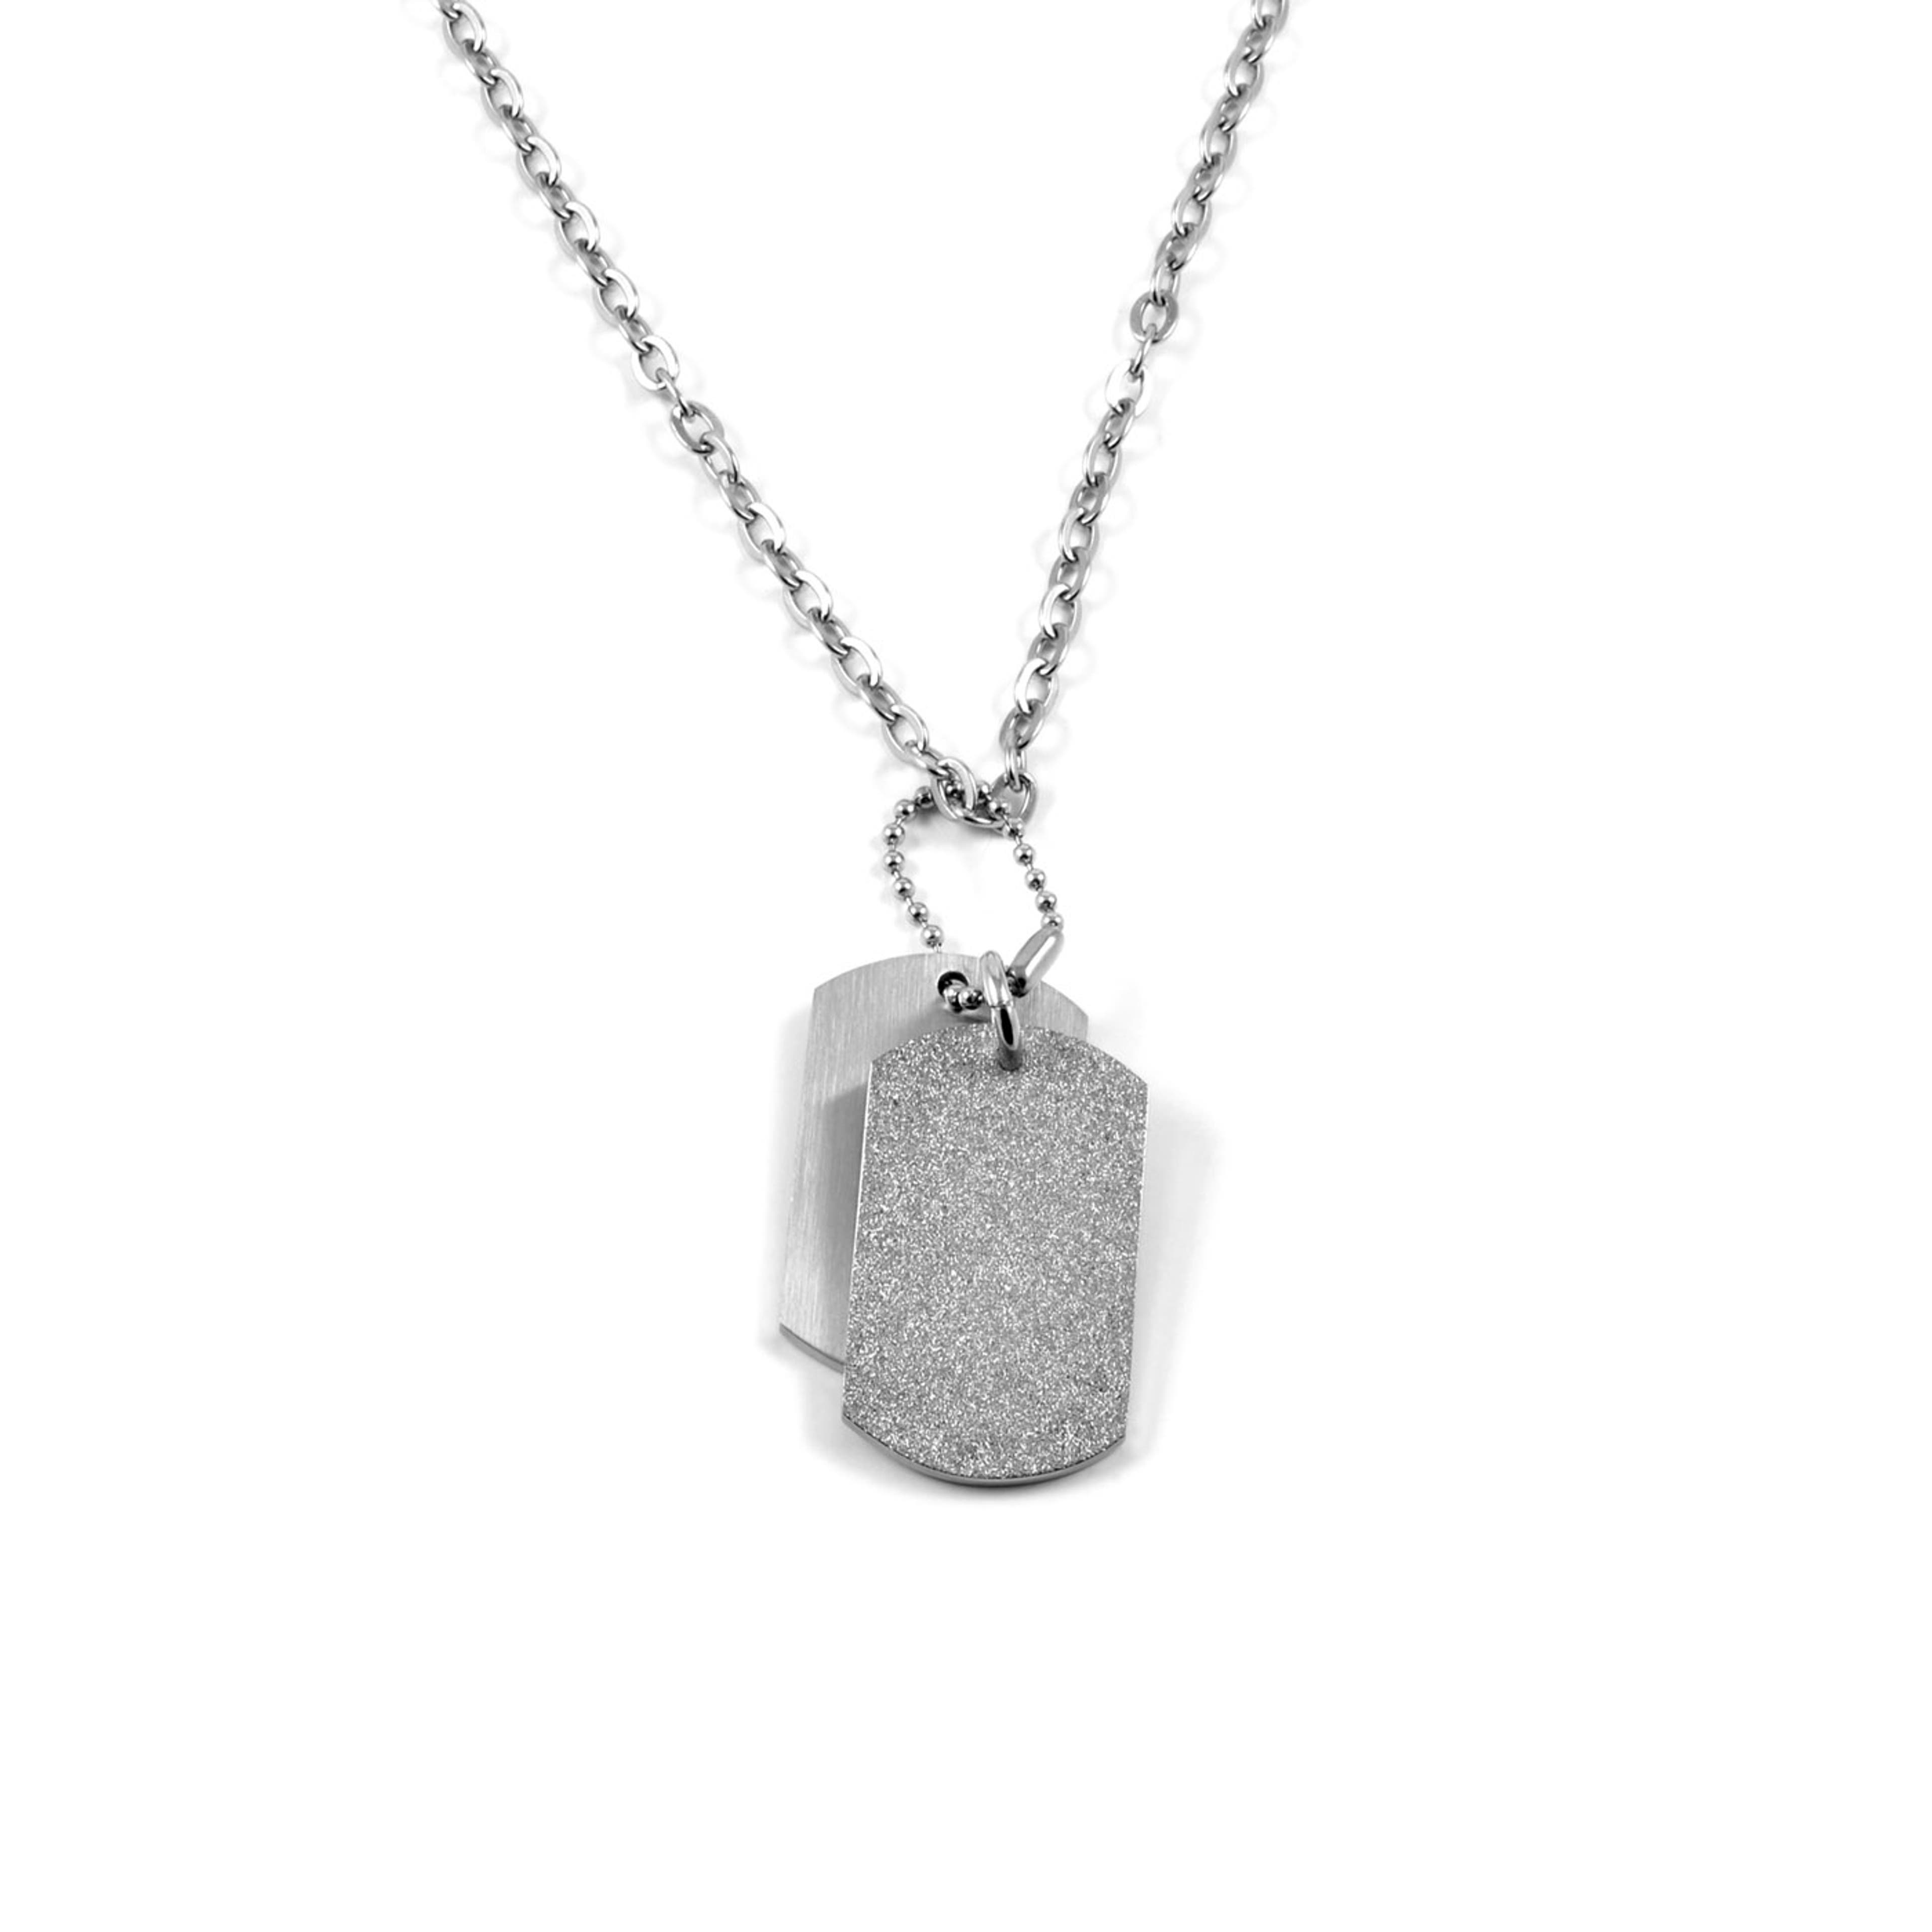 Silver-Tone Stainless Steel Double Dog Tag Cable Chain Necklace